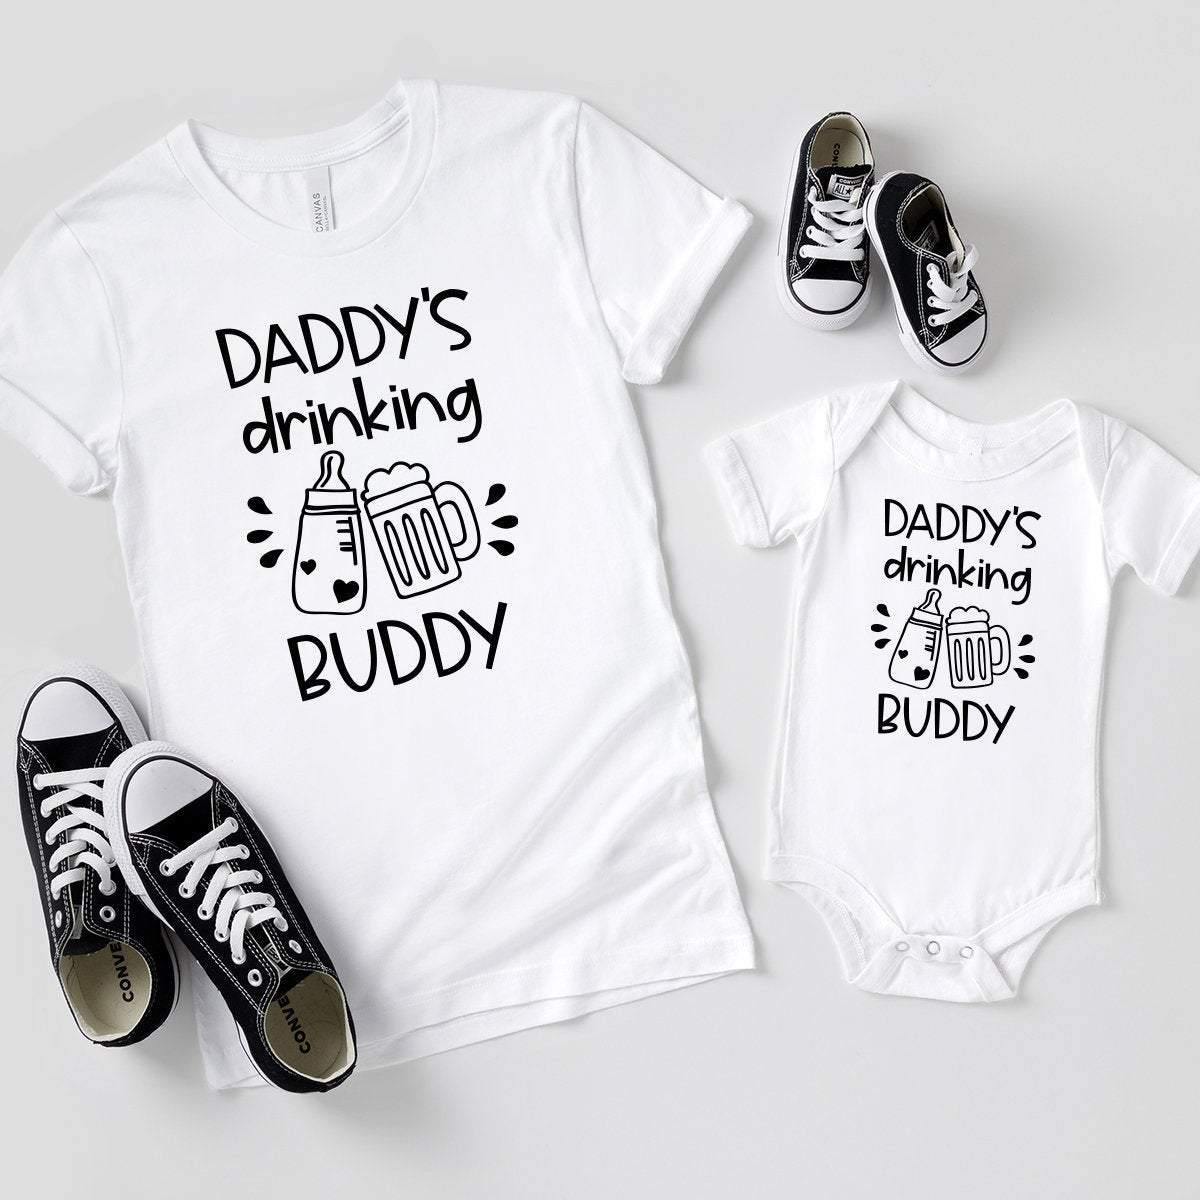 Matching Dad and Baby Shirt, Daddy's Drinking Buddy Shirt, Dad and Son Shirt, Dad Shirt, Baby Boy Onesie, Daddy and Me Shirt, Father Son